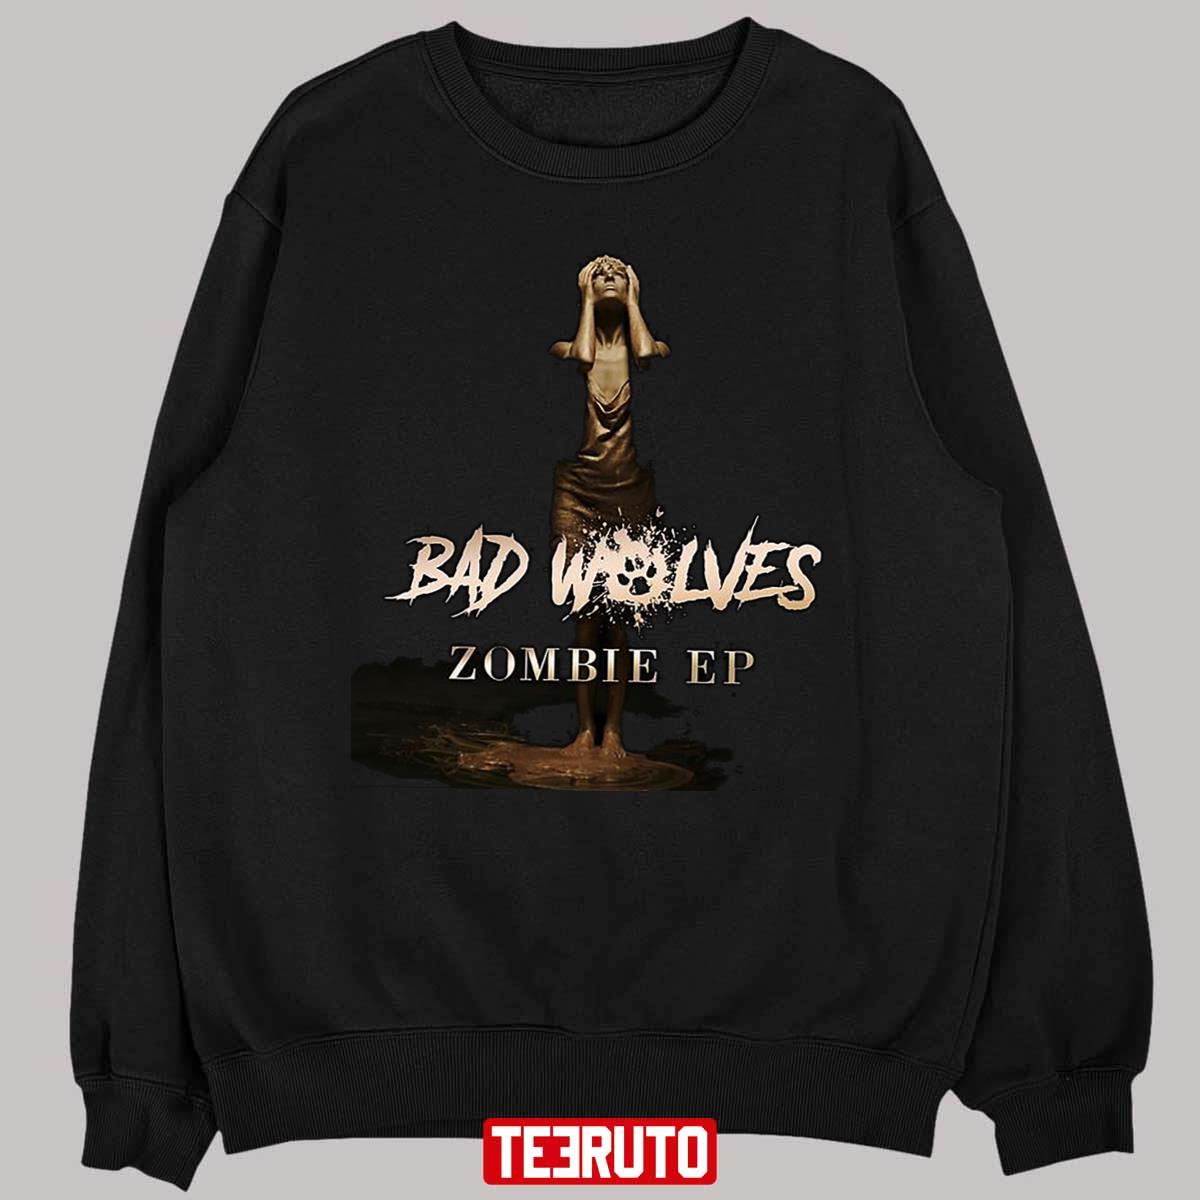 House Of Cards Bad Wolves Unisex T-Shirt